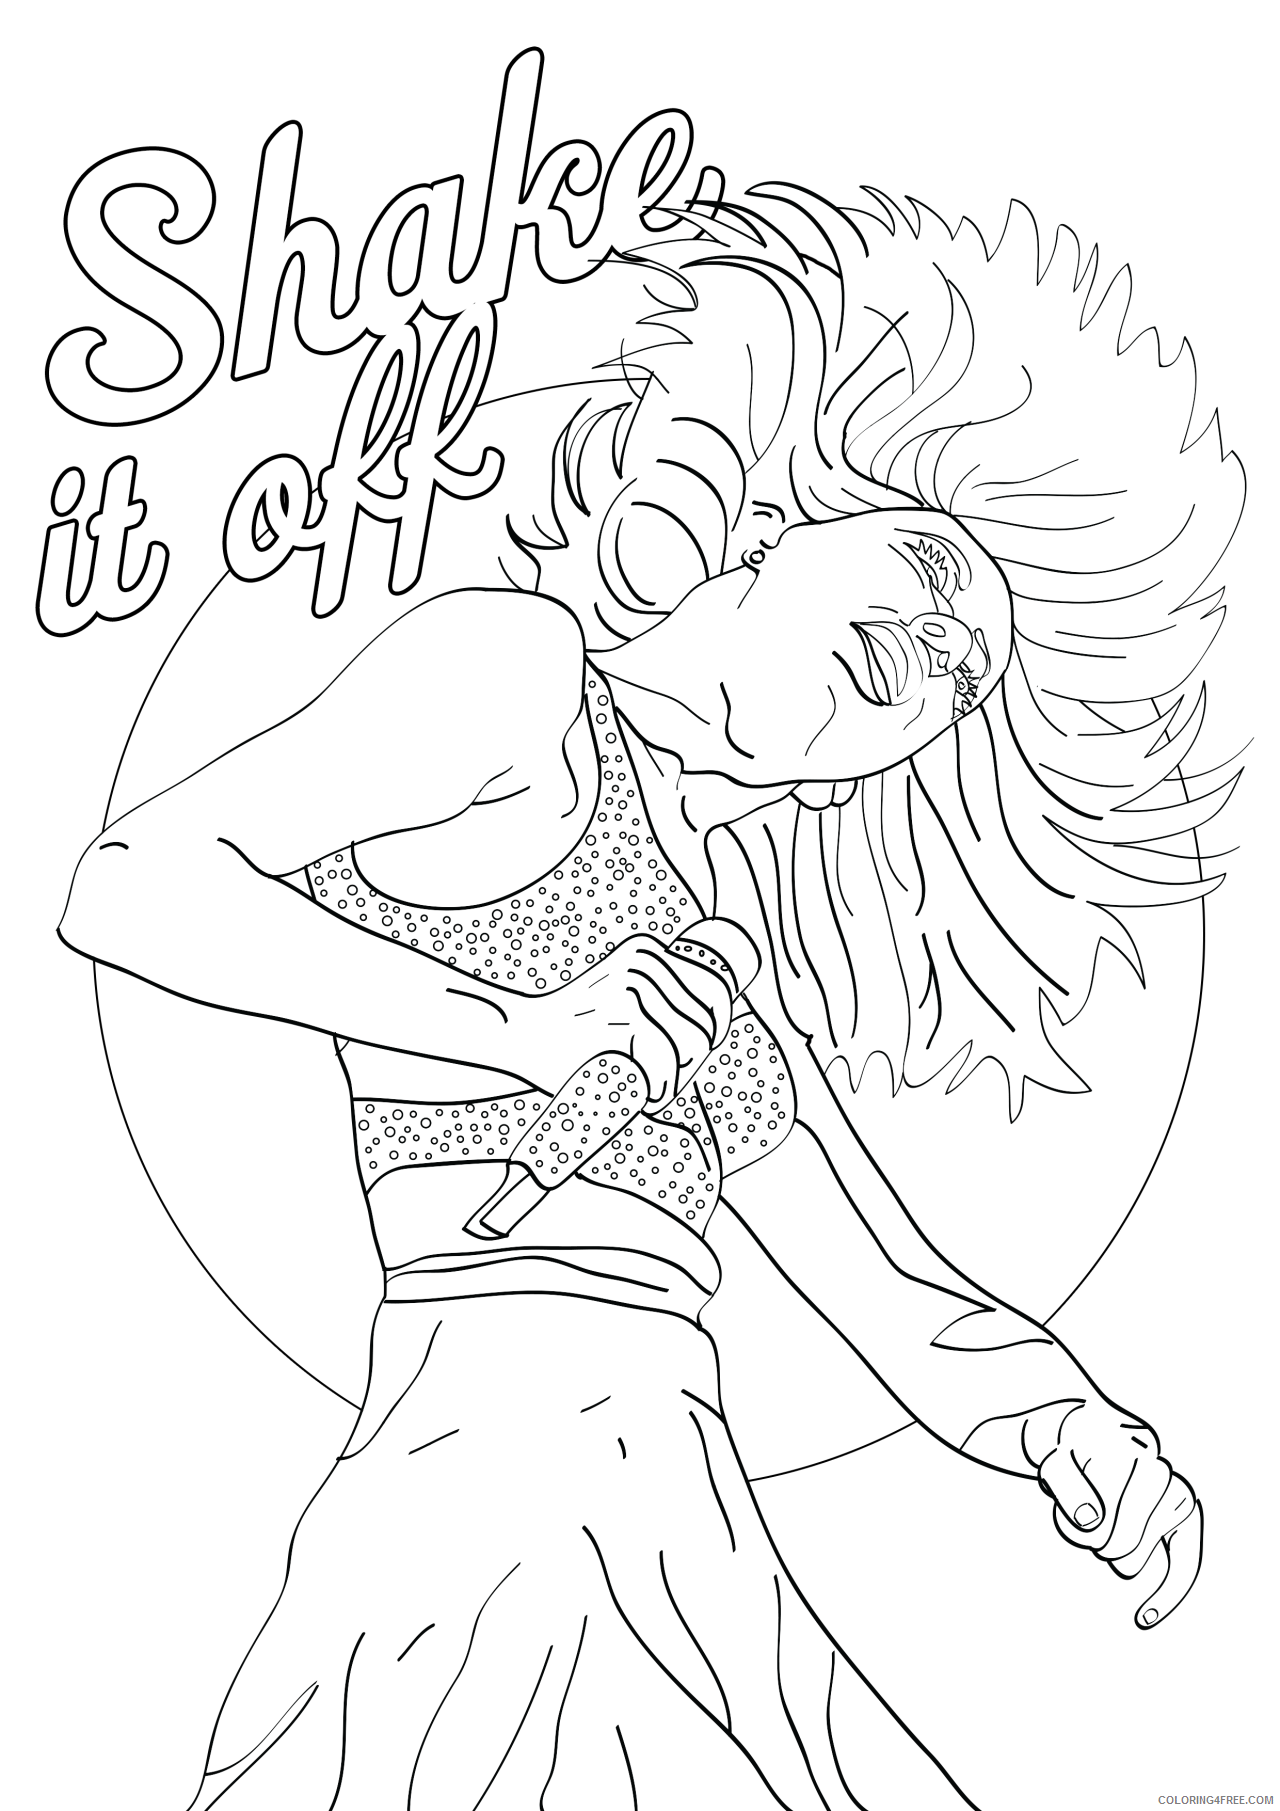 taylor swift coloring pages shake it off Coloring4free